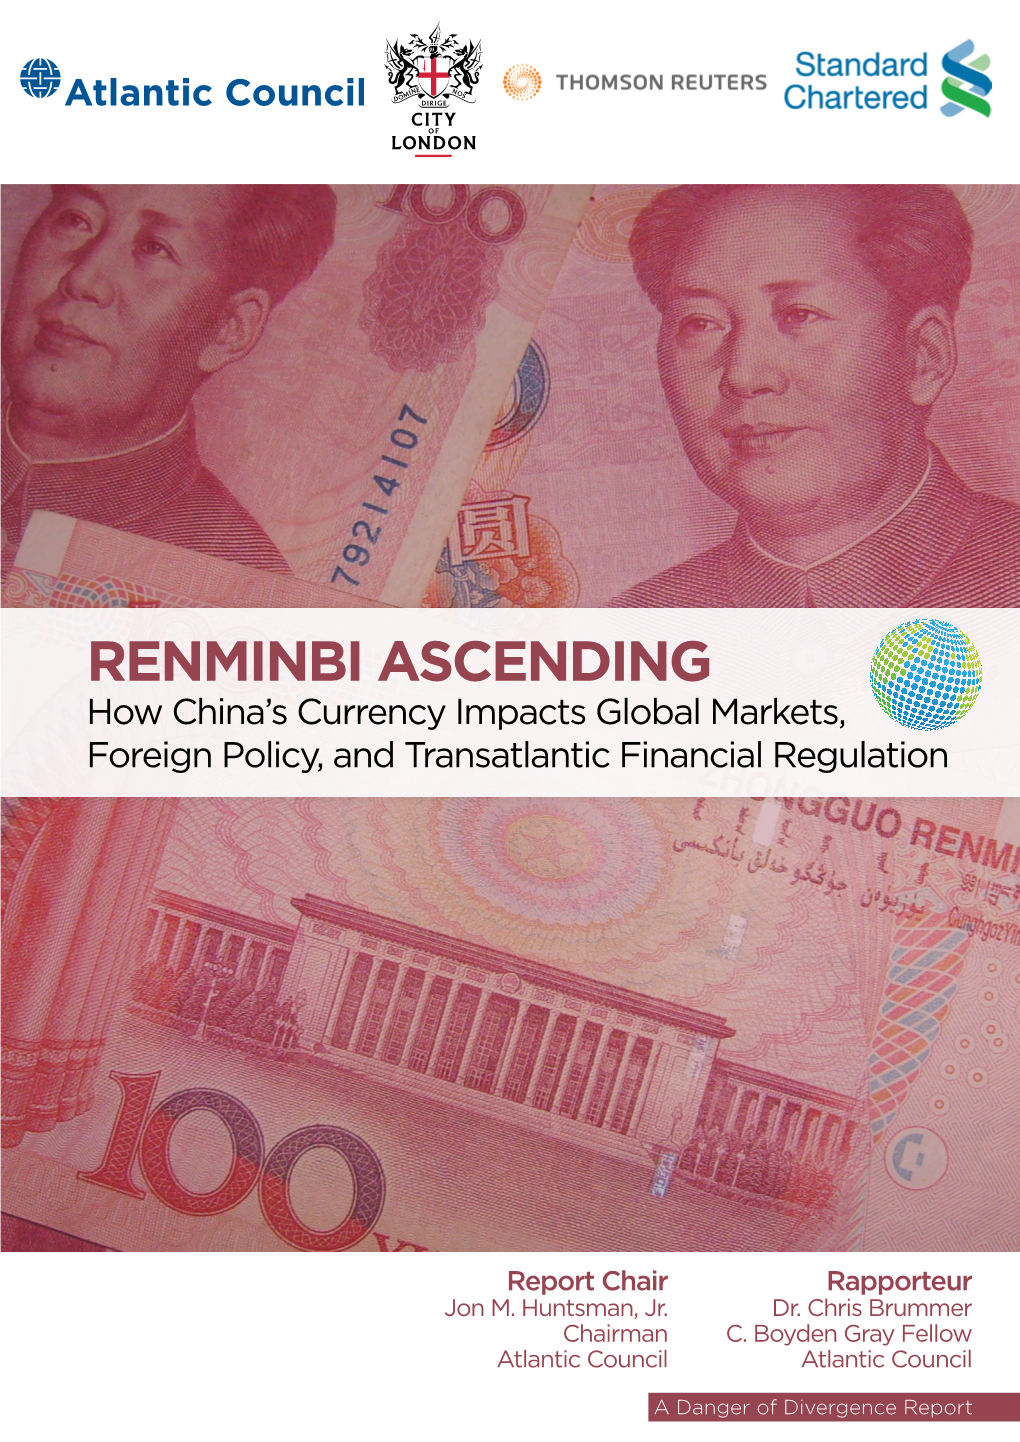 Renminbi Ascending: How China's Currency Impacts Global Markets, Foreign Policy, and Transatlantic Financial Regulation